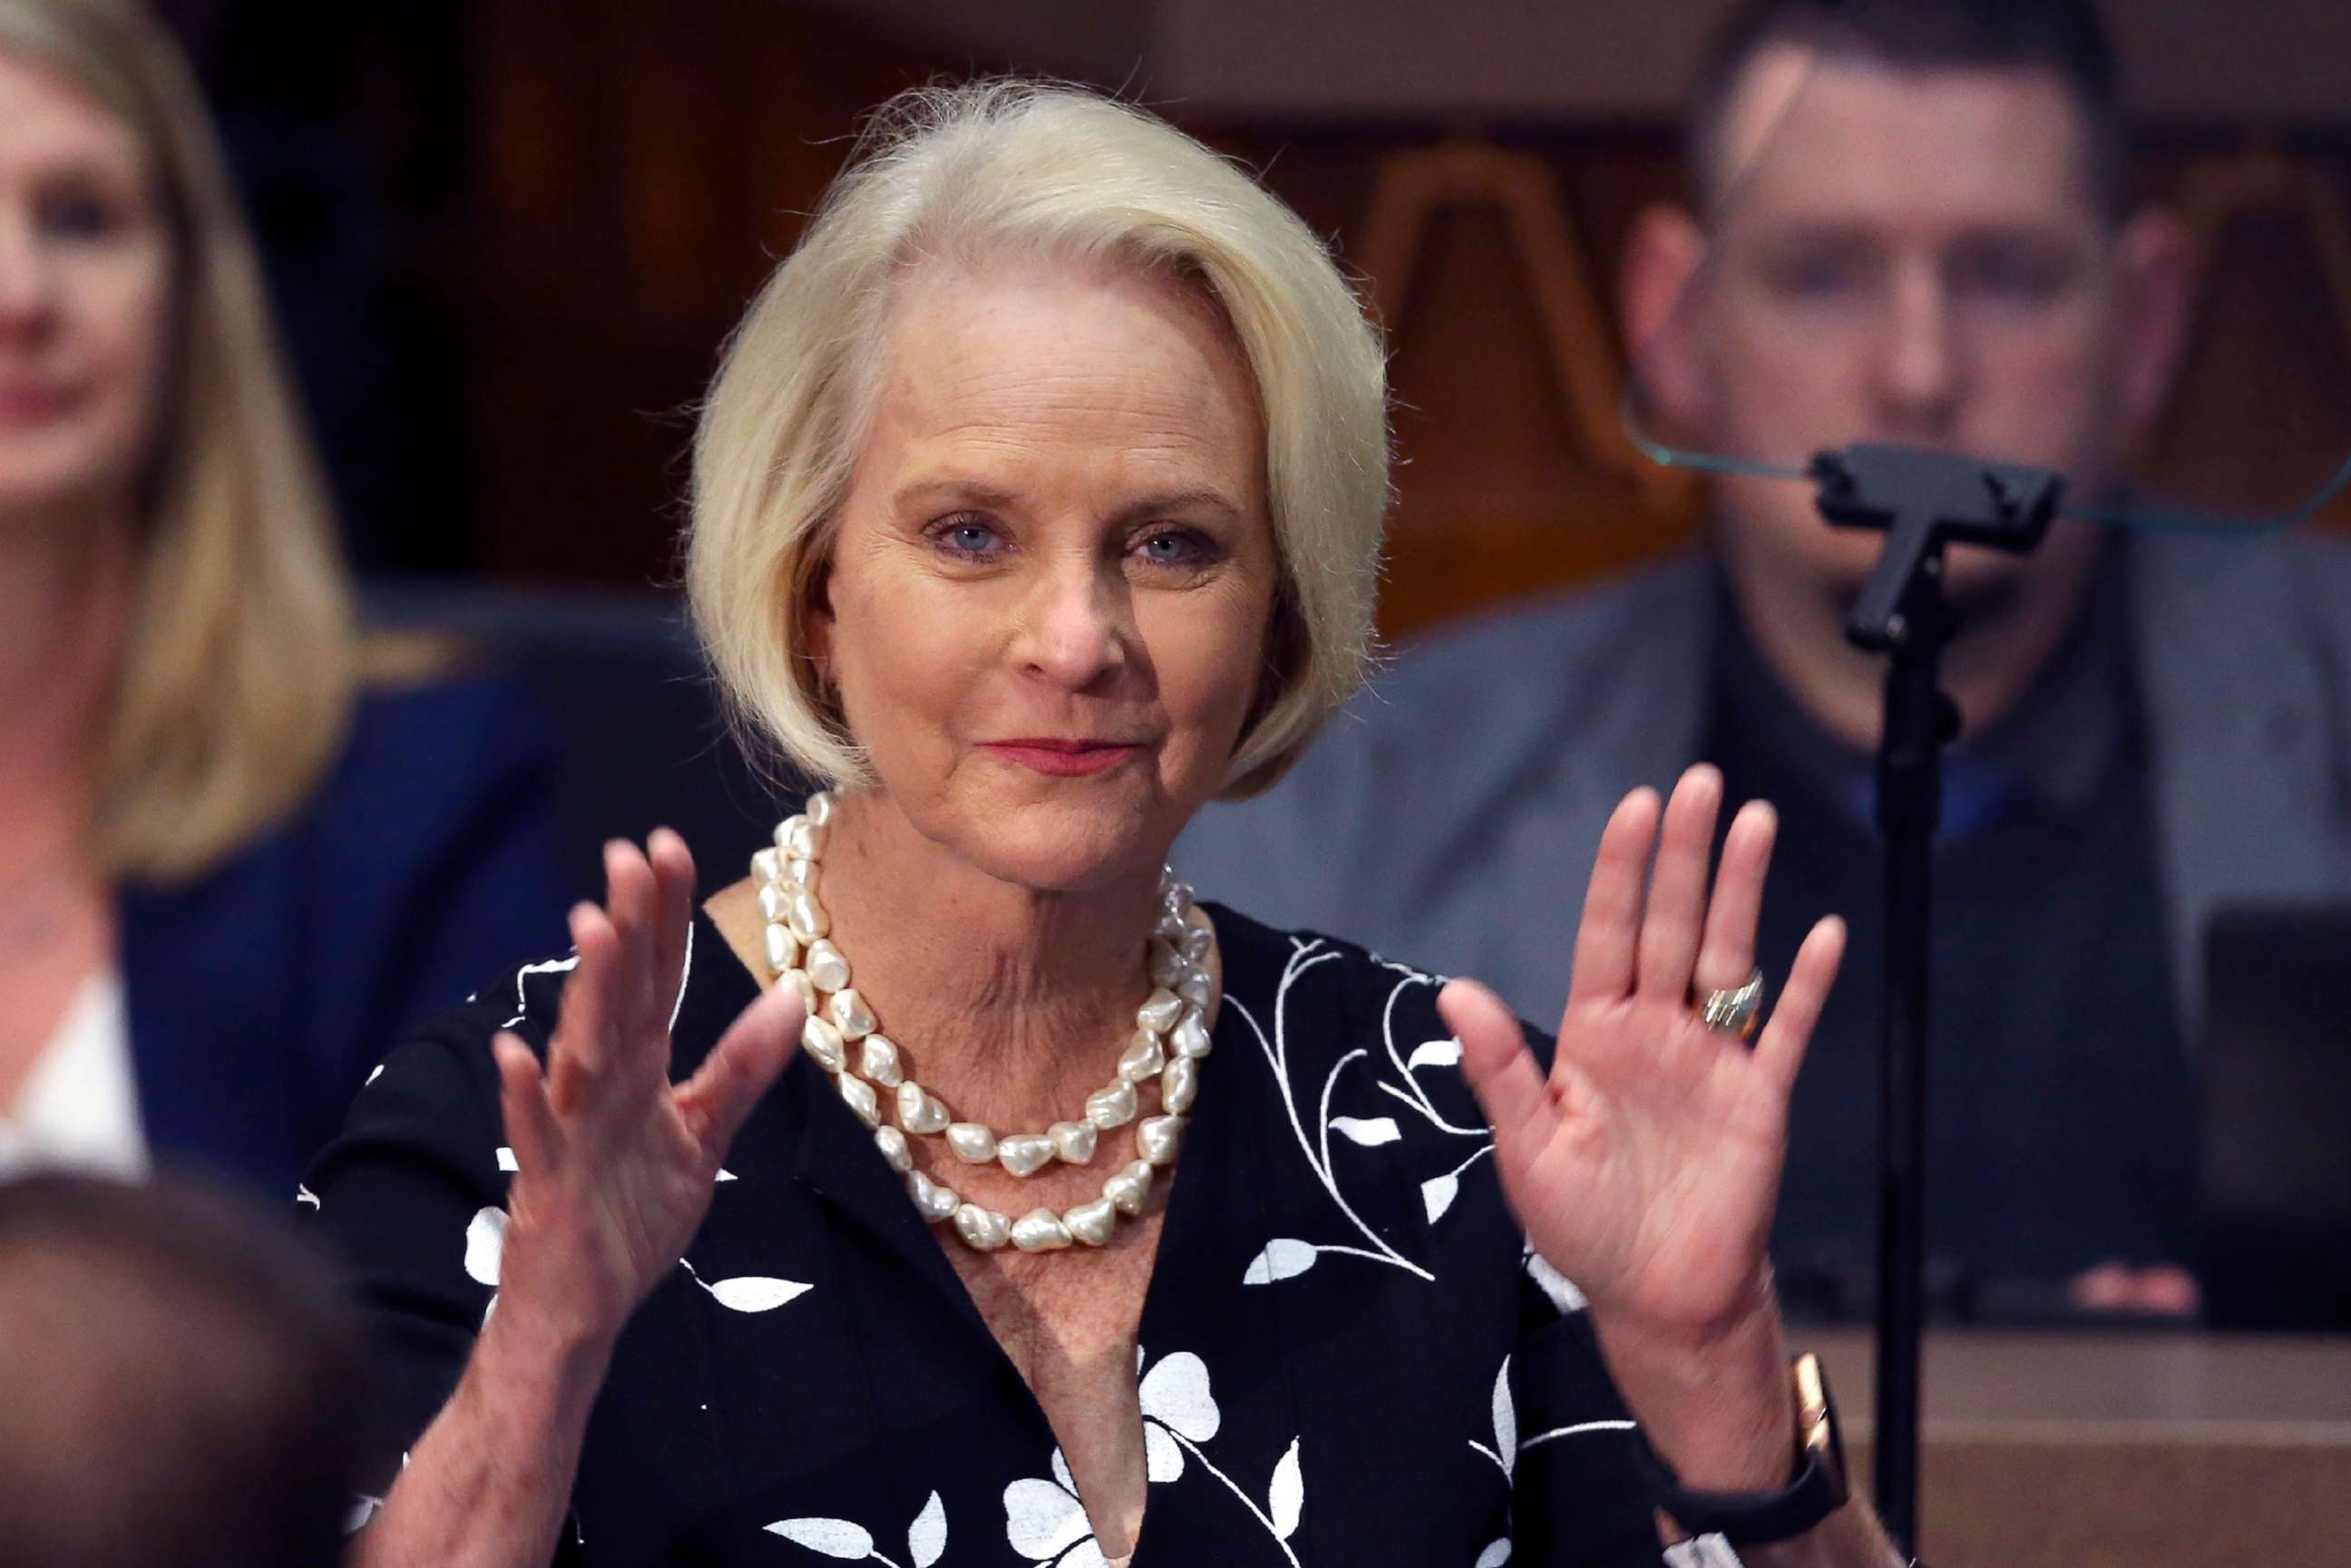 PHOTO: Cindy McCain, wife of former Arizona Sen. John McCain, waves to the crowd after being acknowledged by Arizona Gov. Doug Ducey during his State of the State address, Jan. 13, 2020, in Phoenix. 